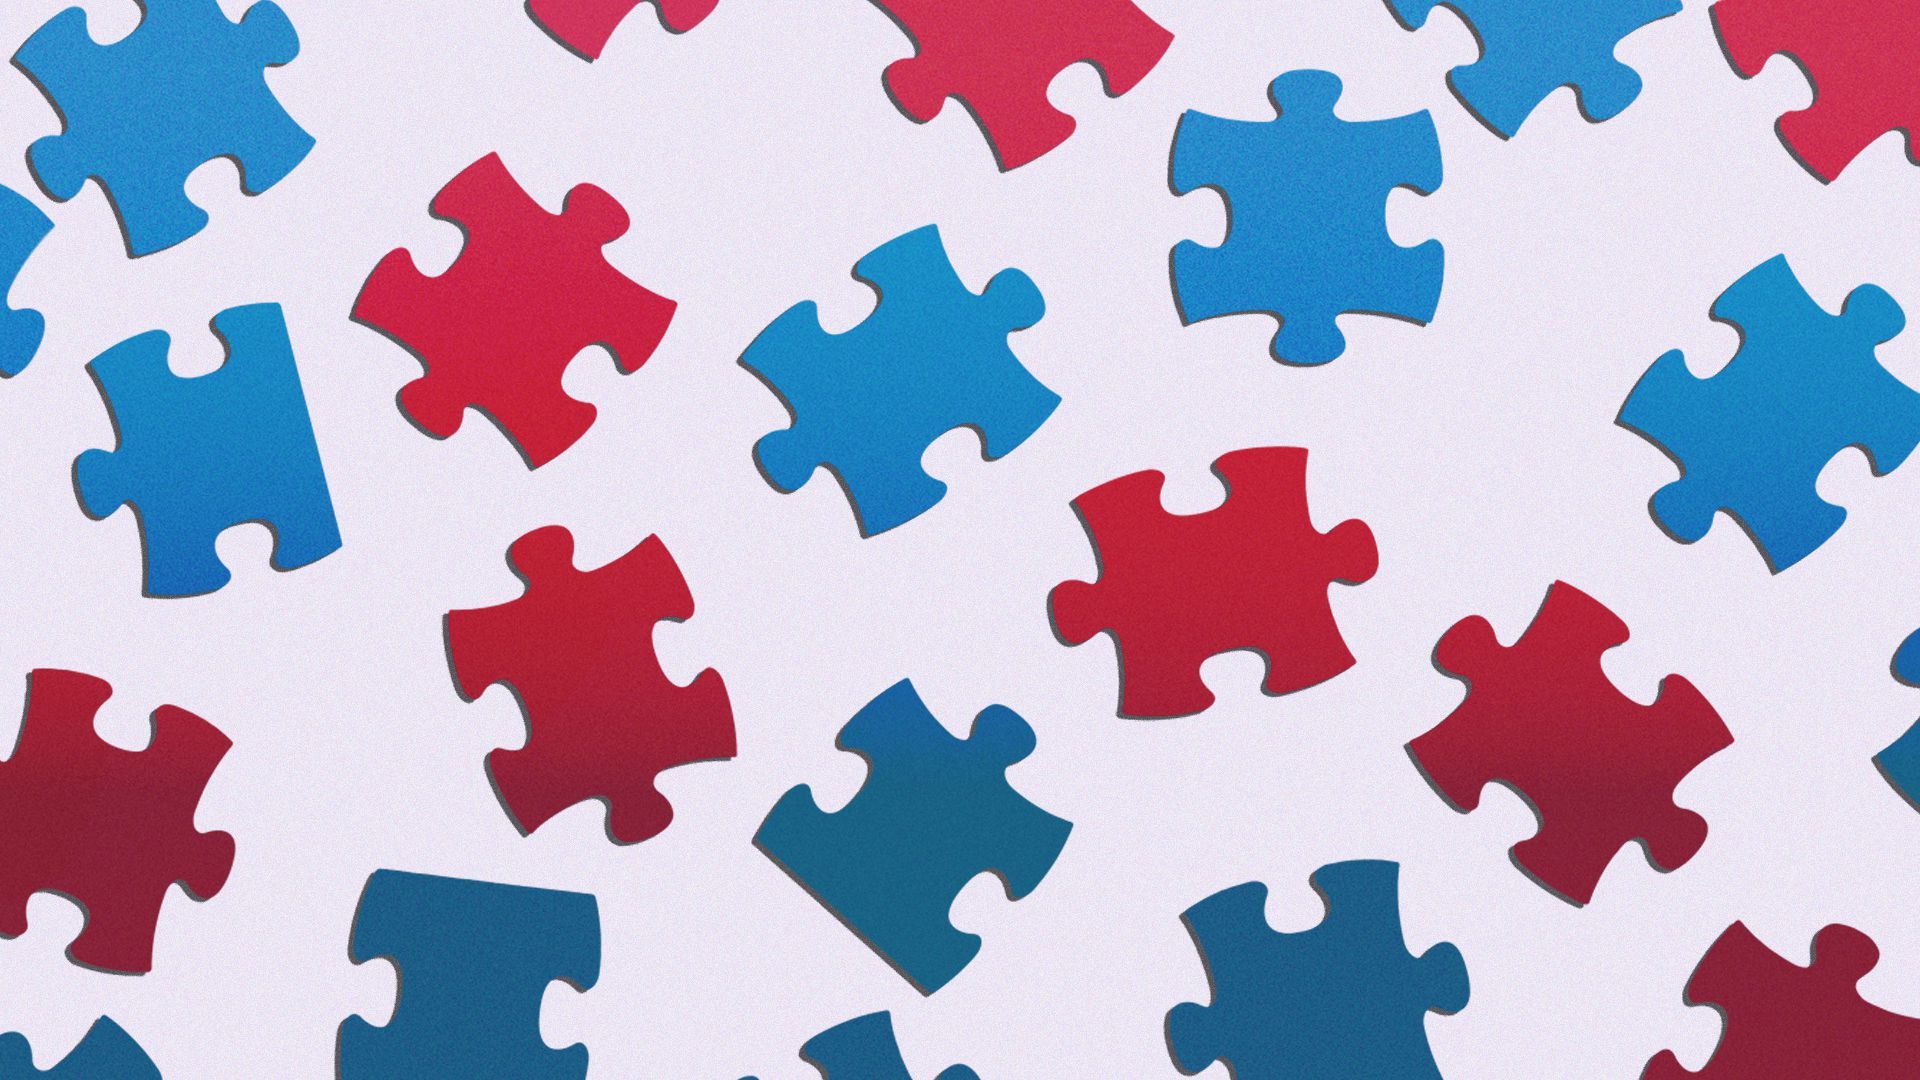 Illustration of scattered red and blue jigsaw puzzle pieces.